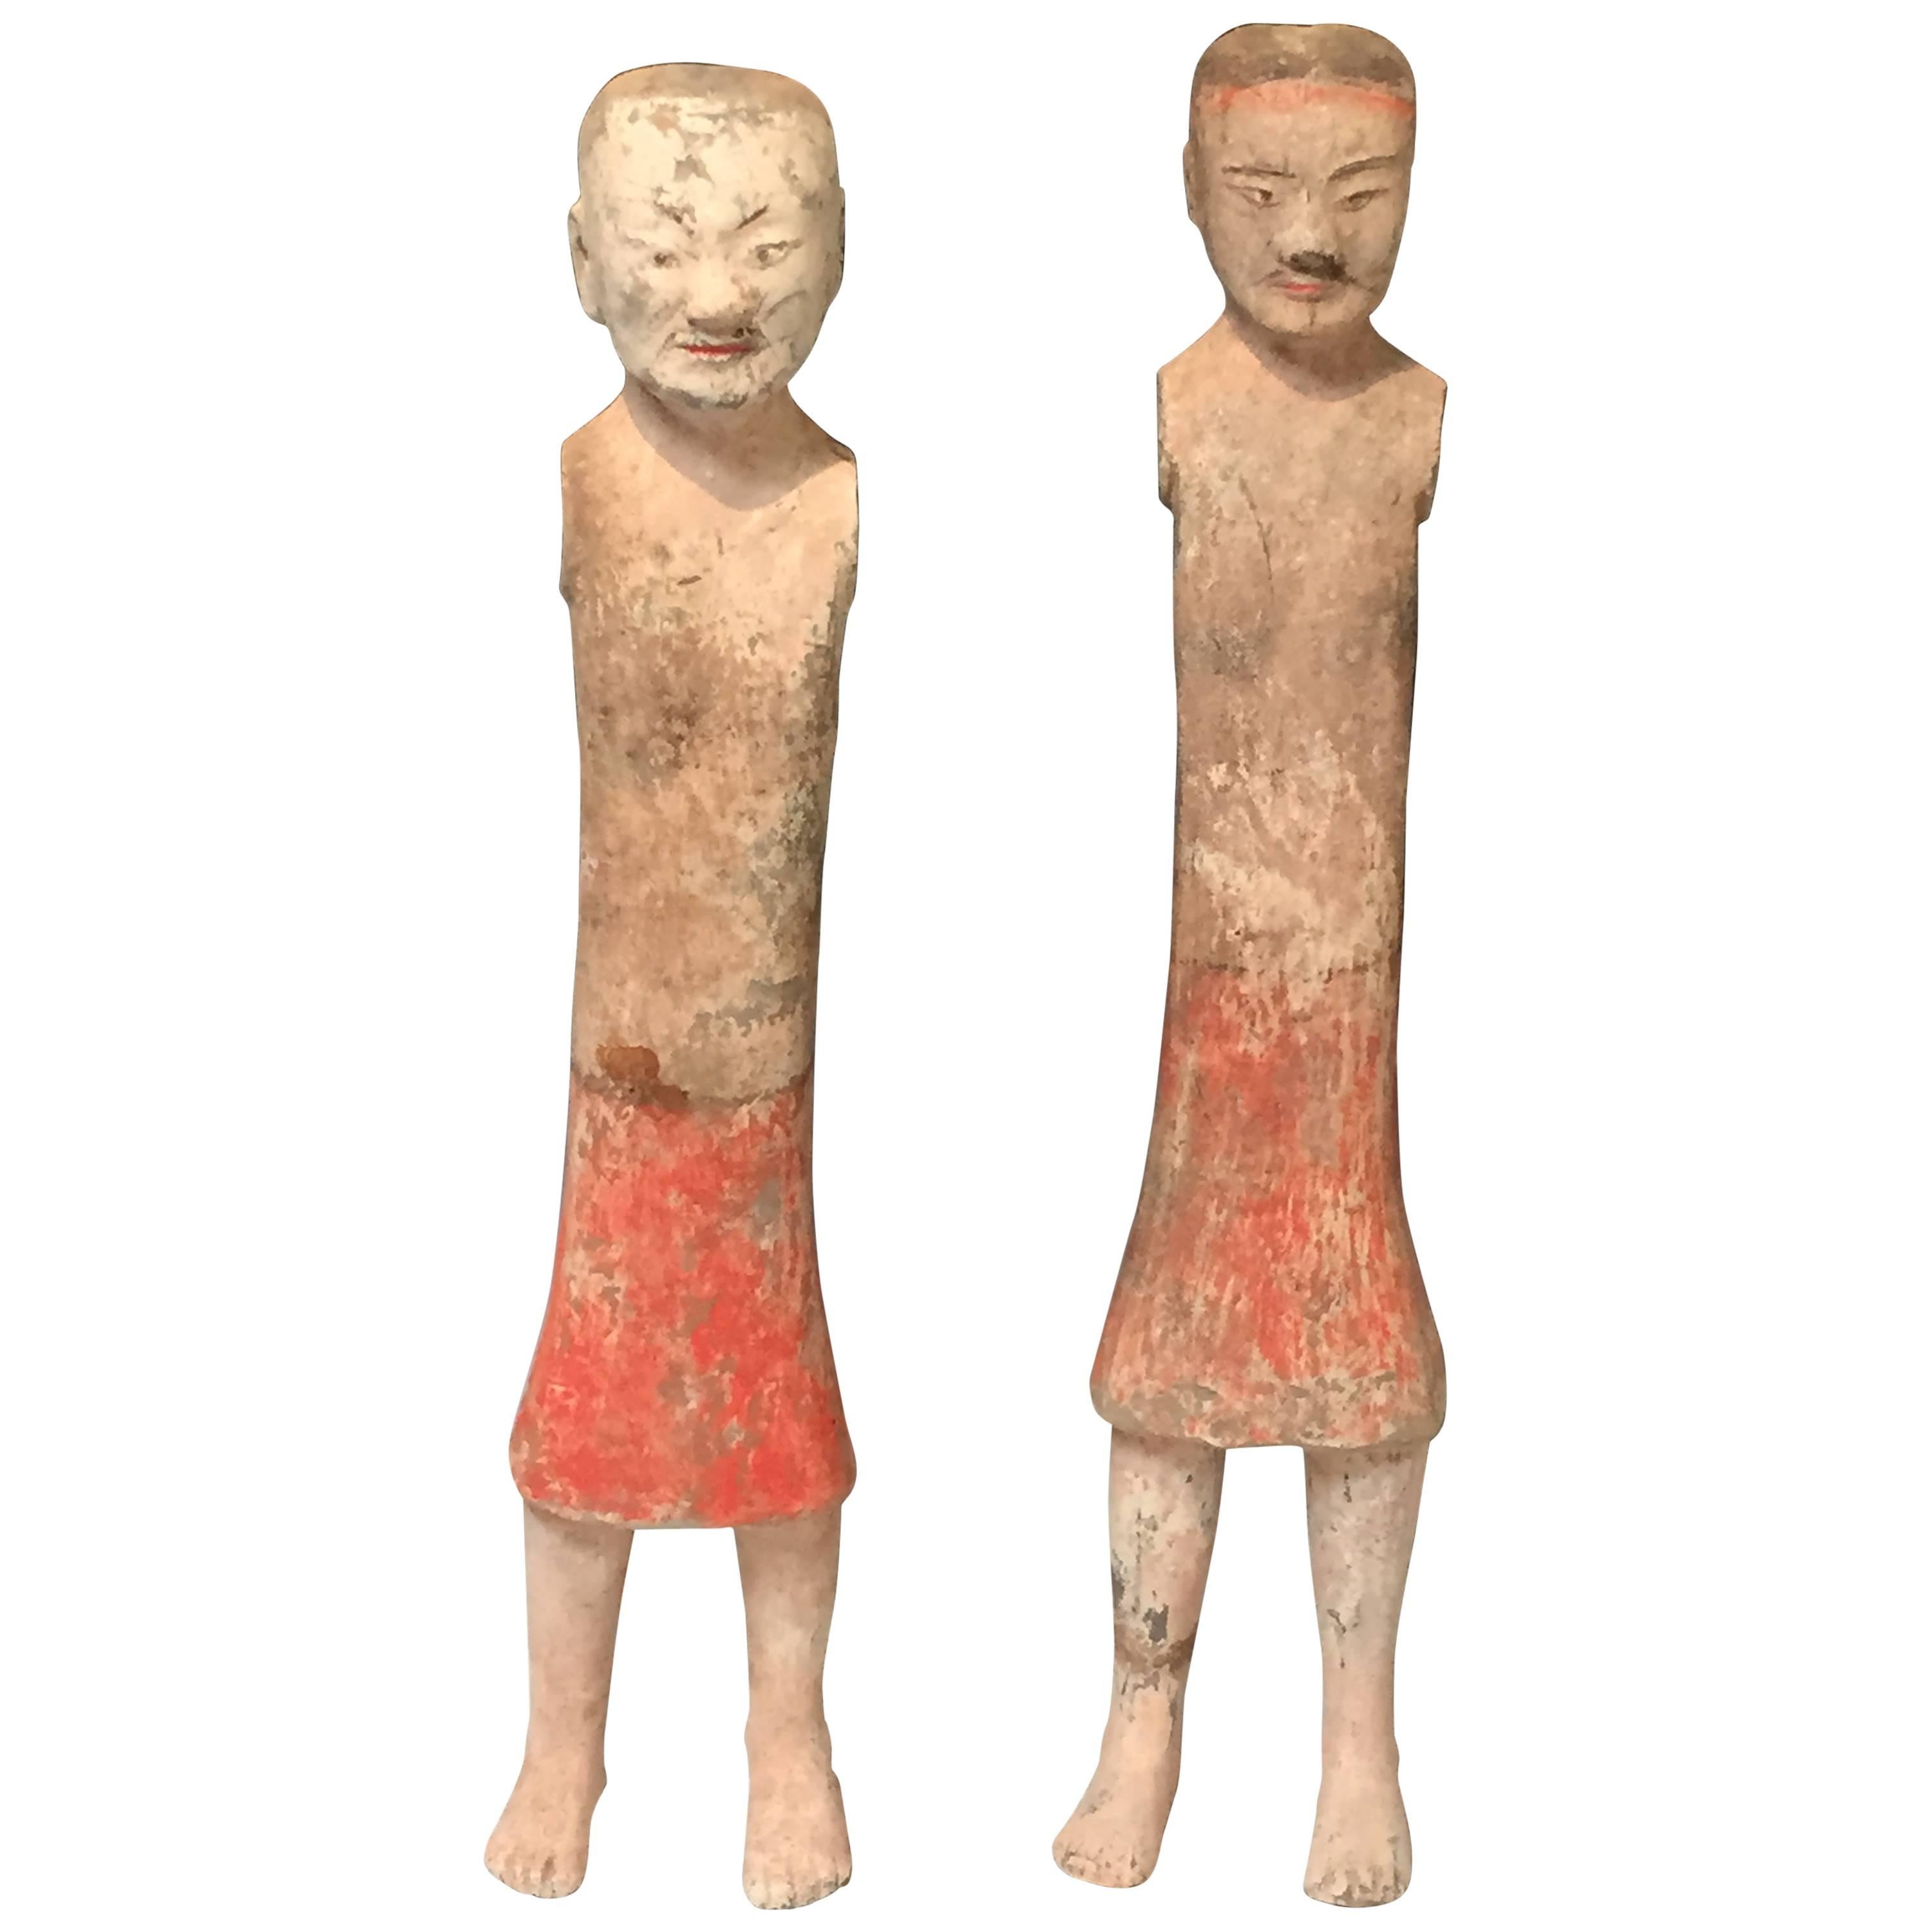 Ancient Han Dynasty Ceramic Male Figures, 206 BC-220 AD